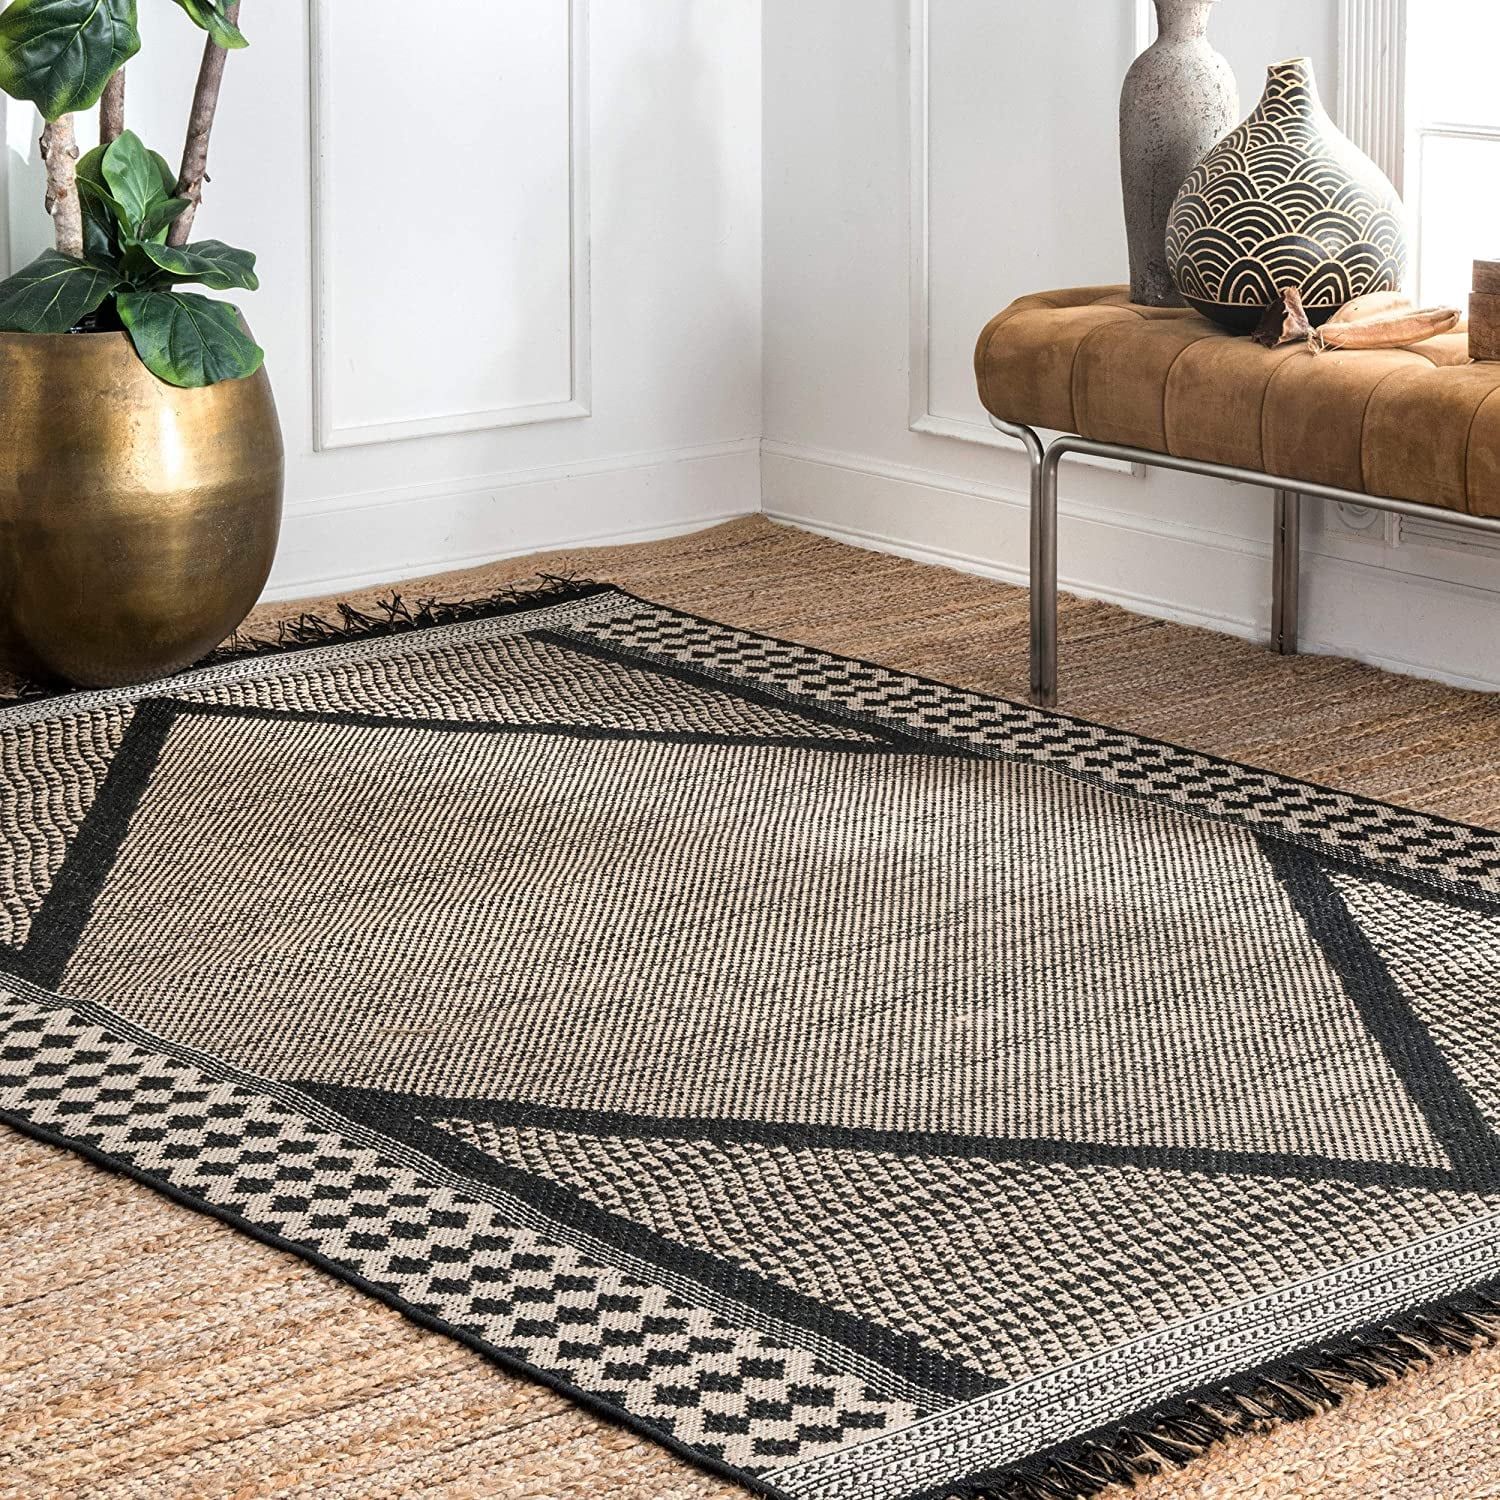 Best Outdoor Rugs From Amazon | Popsugar Home Throughout Outdoor Modern Rugs (View 7 of 15)